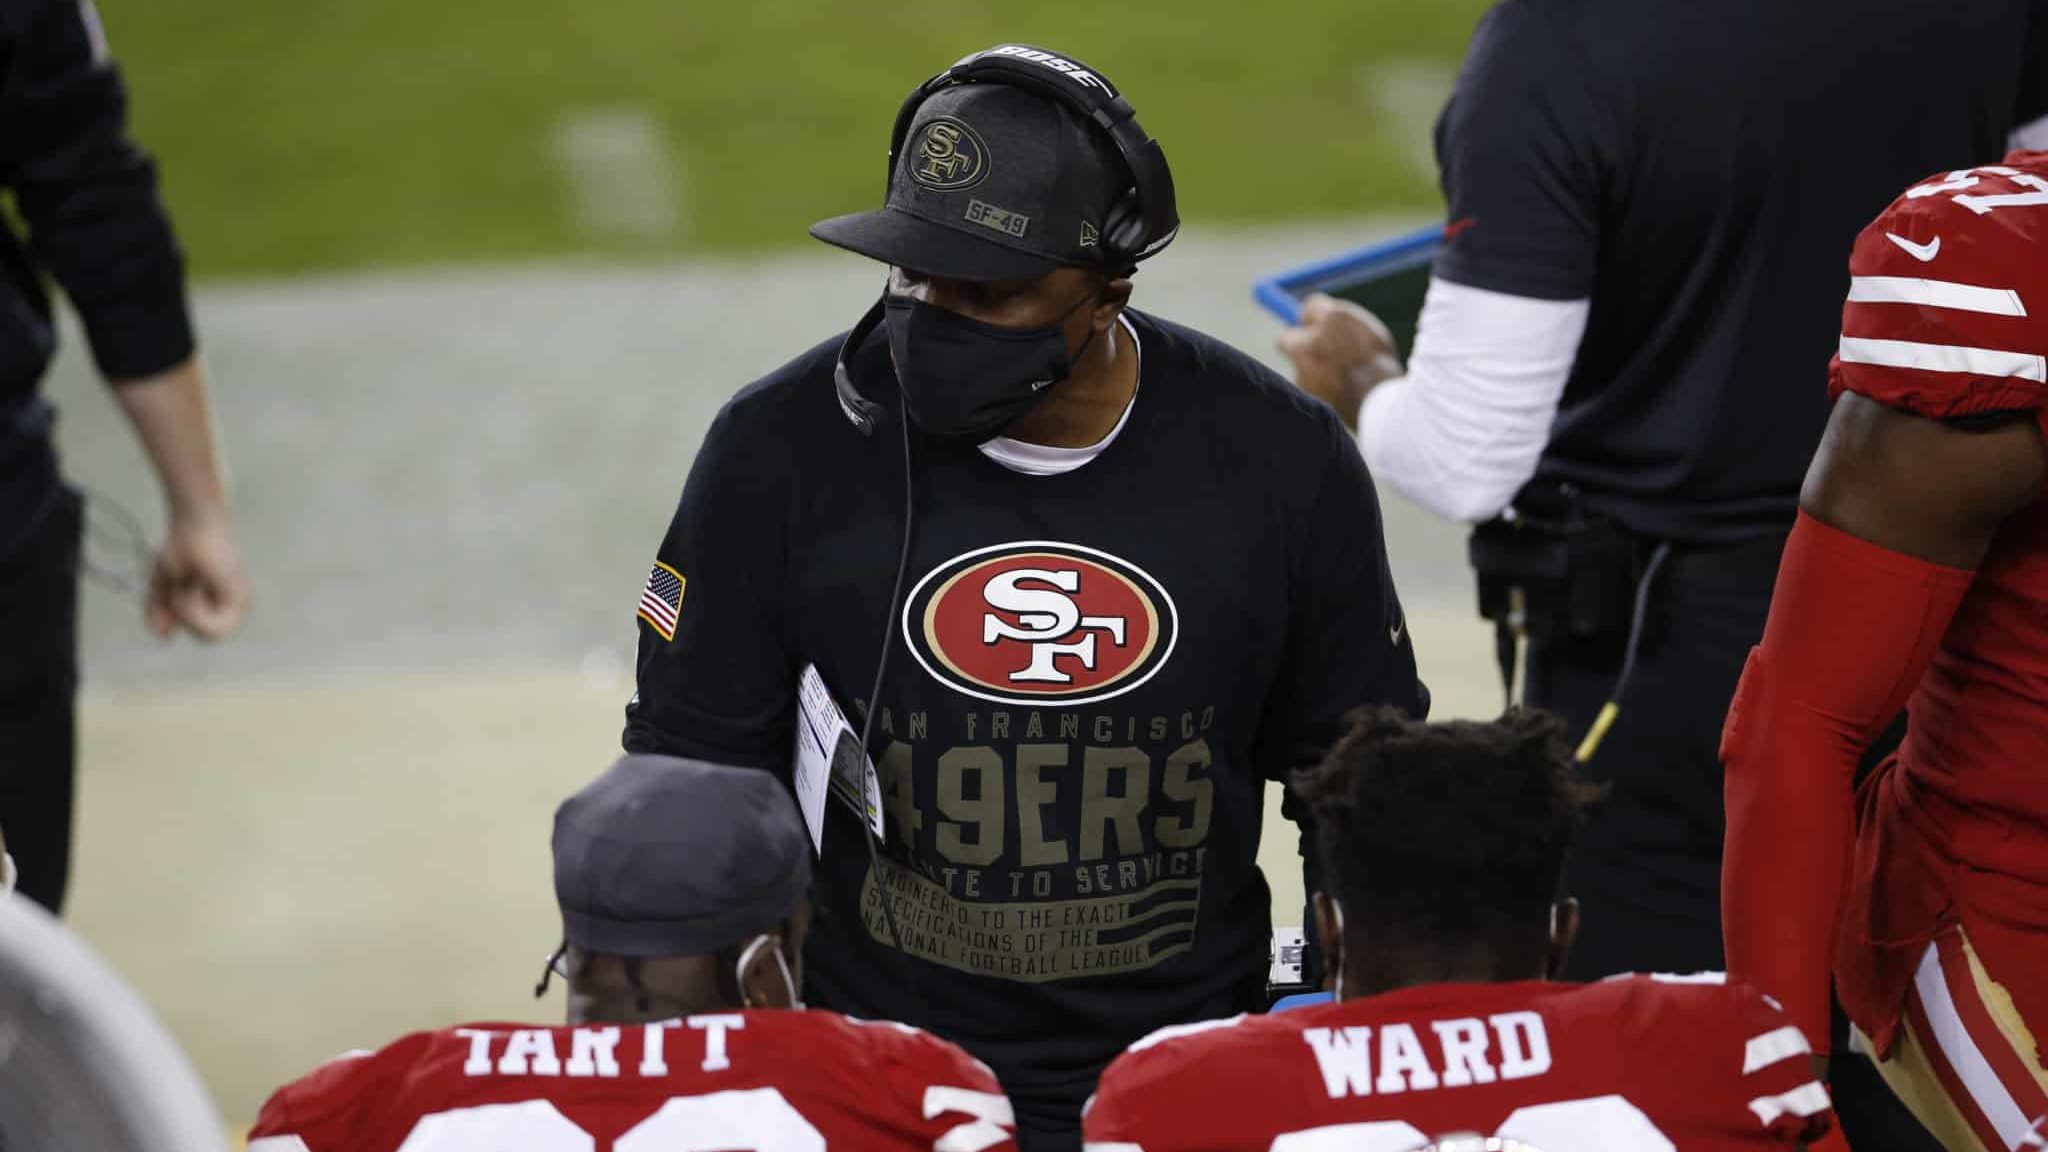 SANTA CLARA, CA - NOVEMBER 3: Defensive backs/cornerbacks coach Tony Oden of the San Francisco 49ers talks with the defensive backs on the sideline during the game against the Green Bay Packers at Levi's Stadium on November 3, 2020 in Santa Clara, California. The Packers defeated the 49ers 34-17.